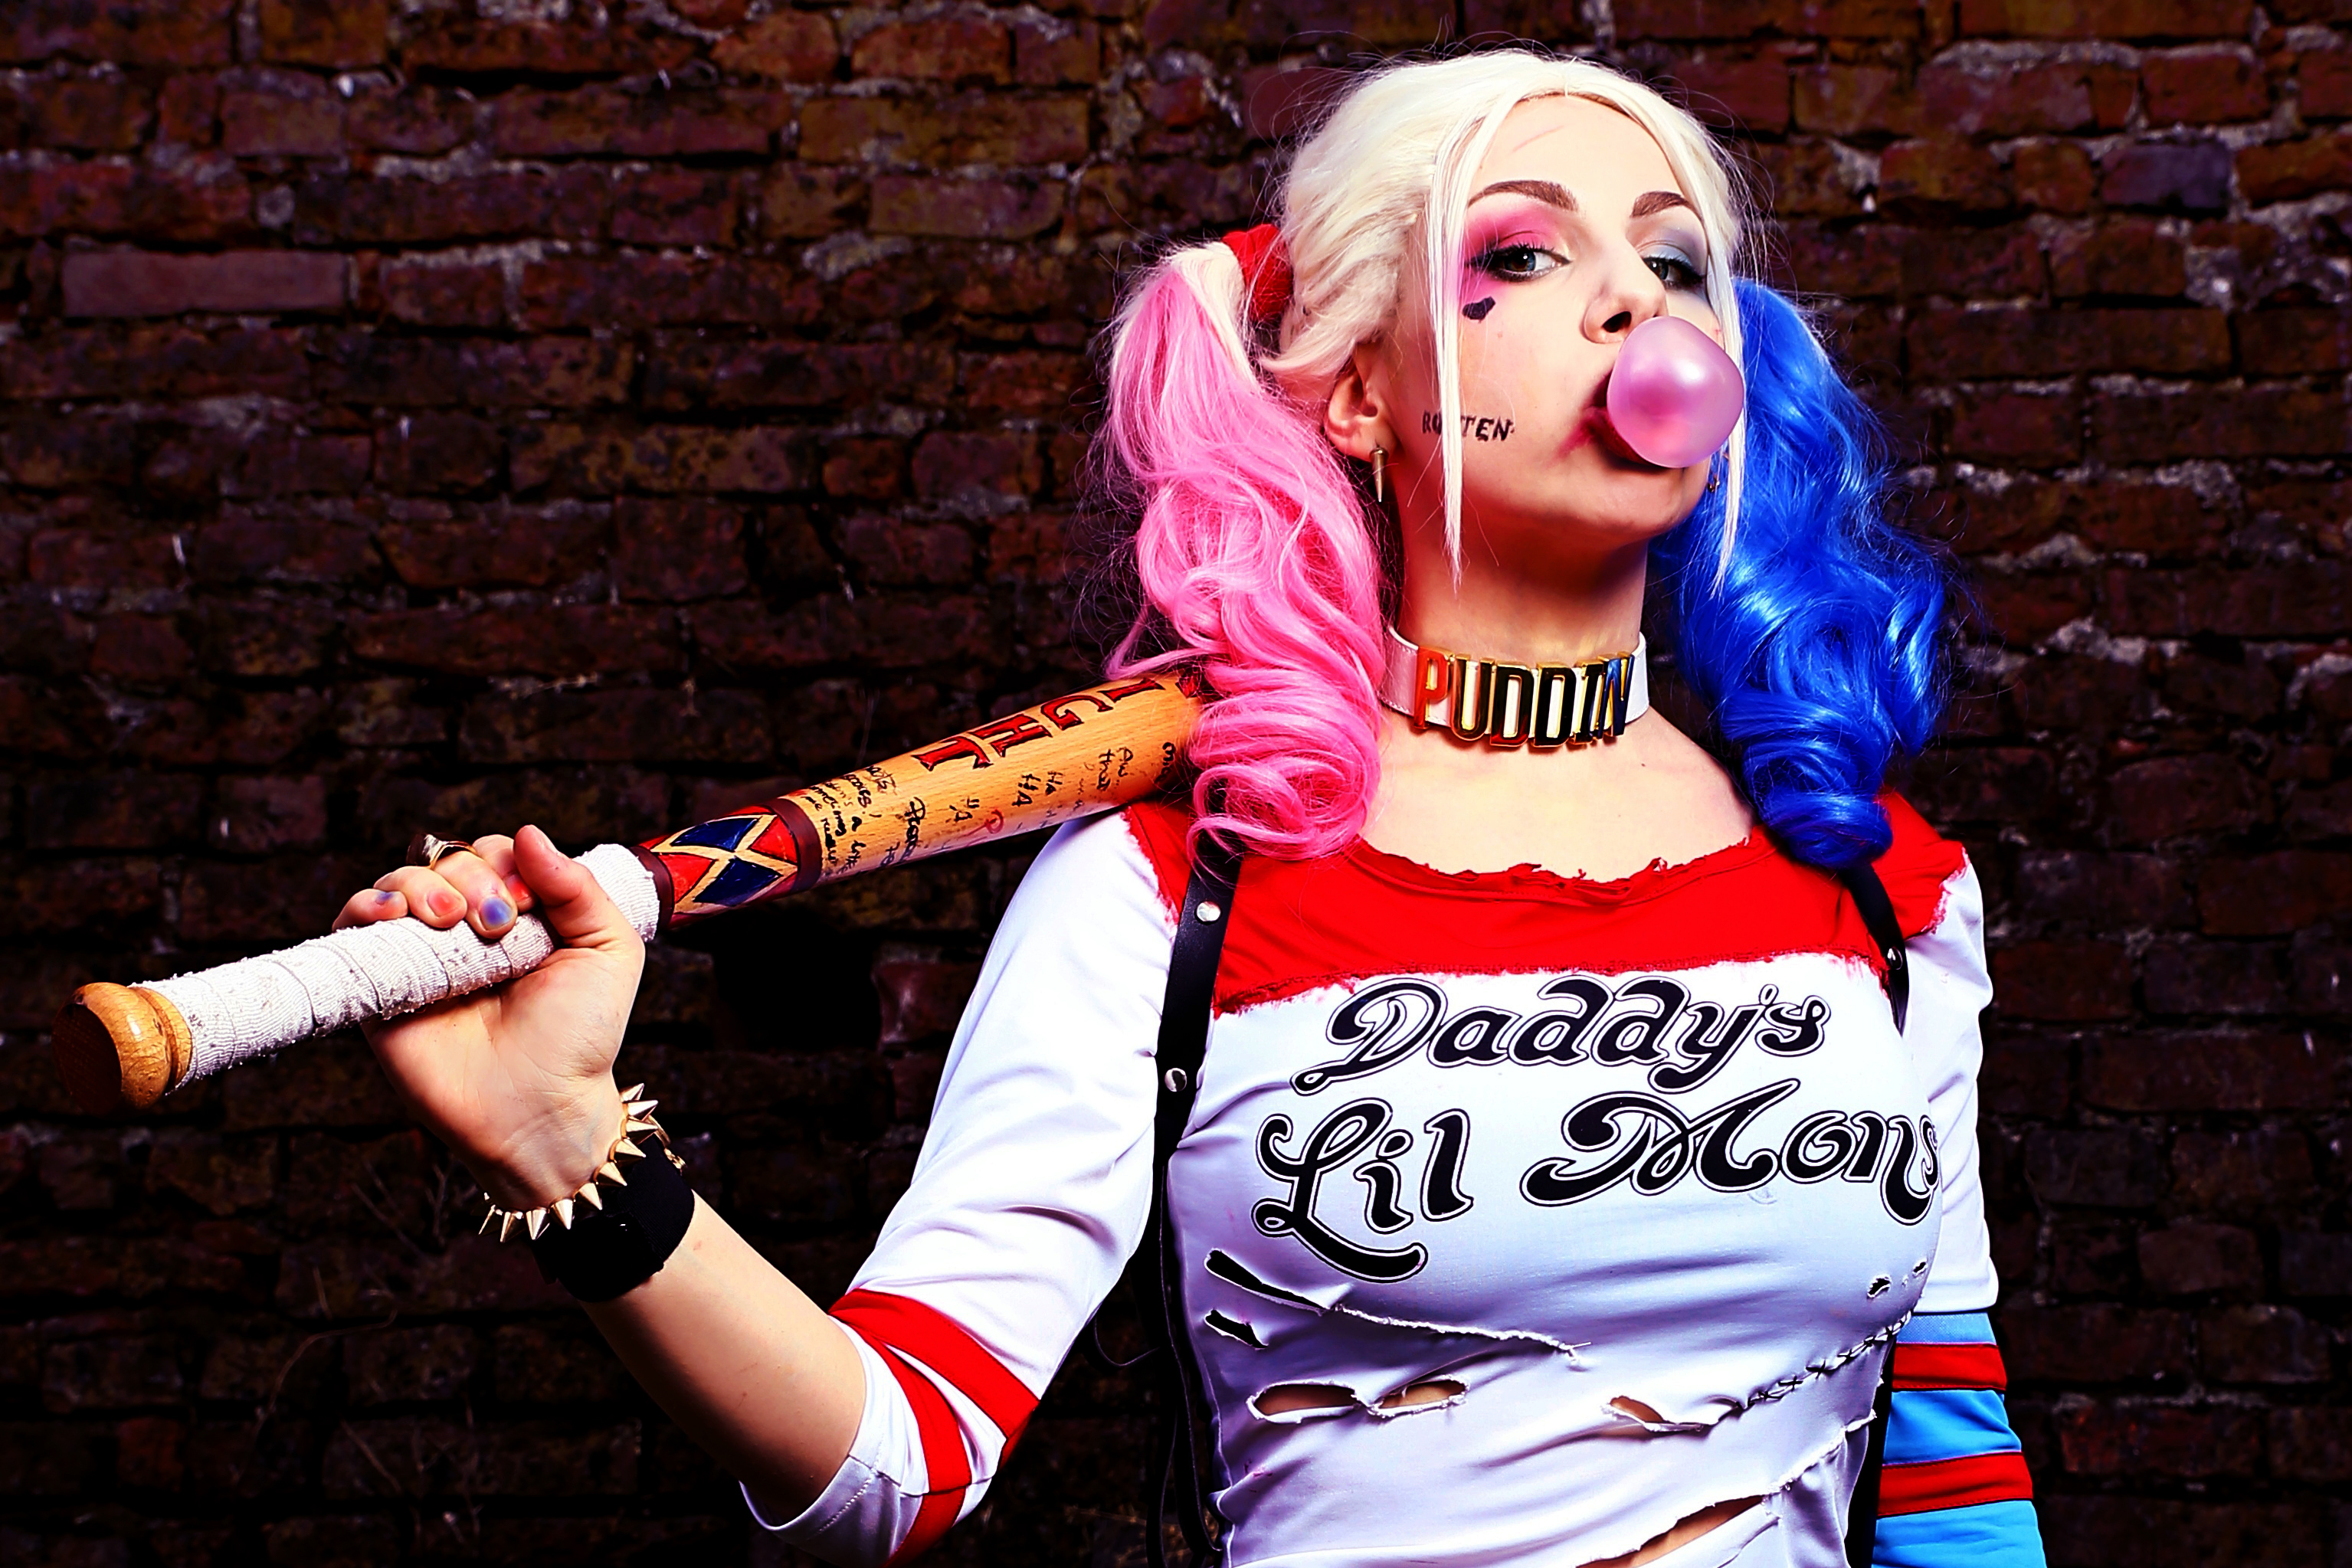 suicide squad, harley quinn, cosplay, women Full HD